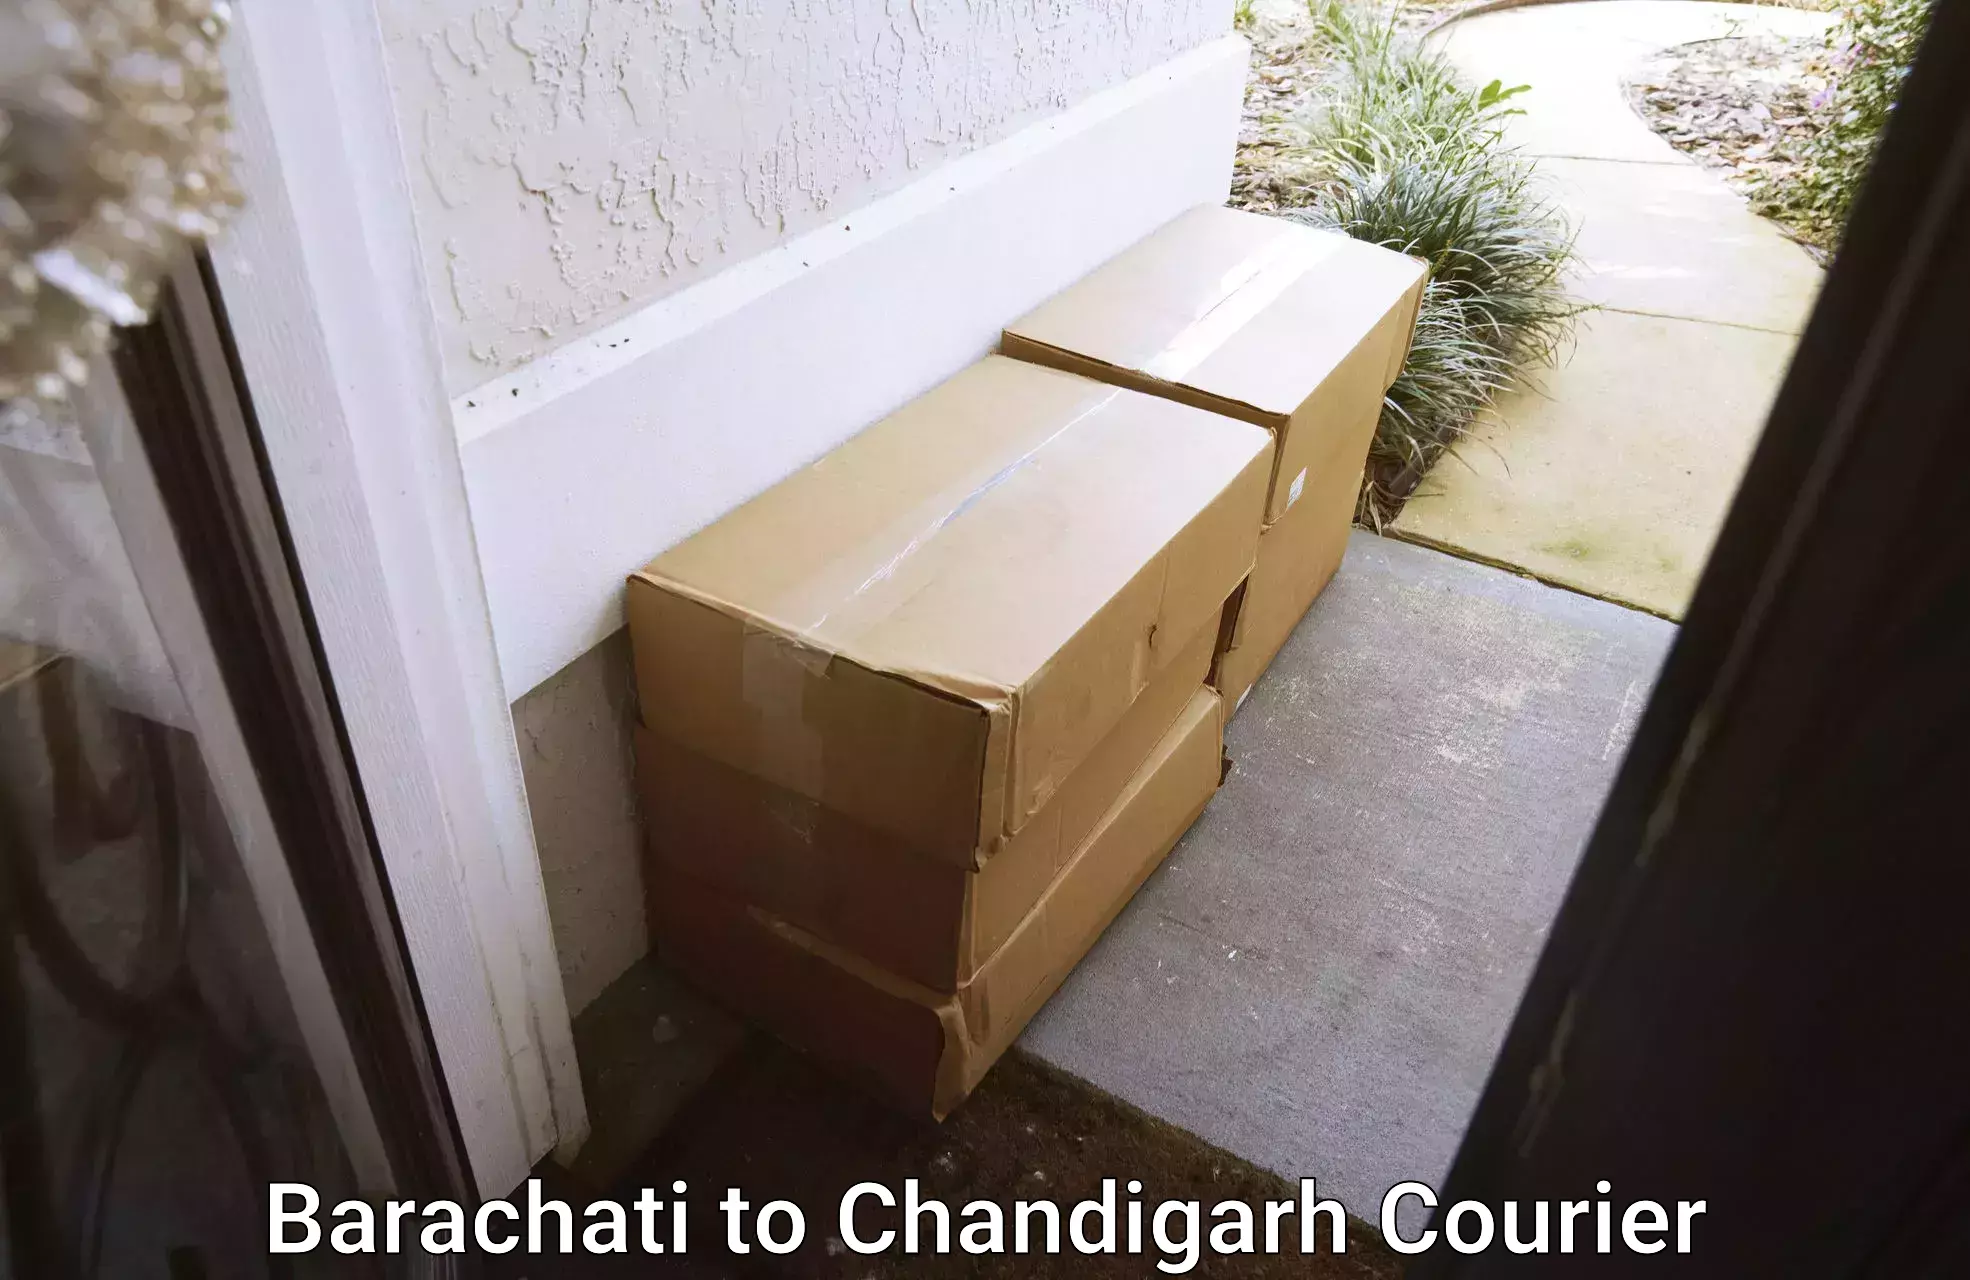 Specialized moving company Barachati to Chandigarh